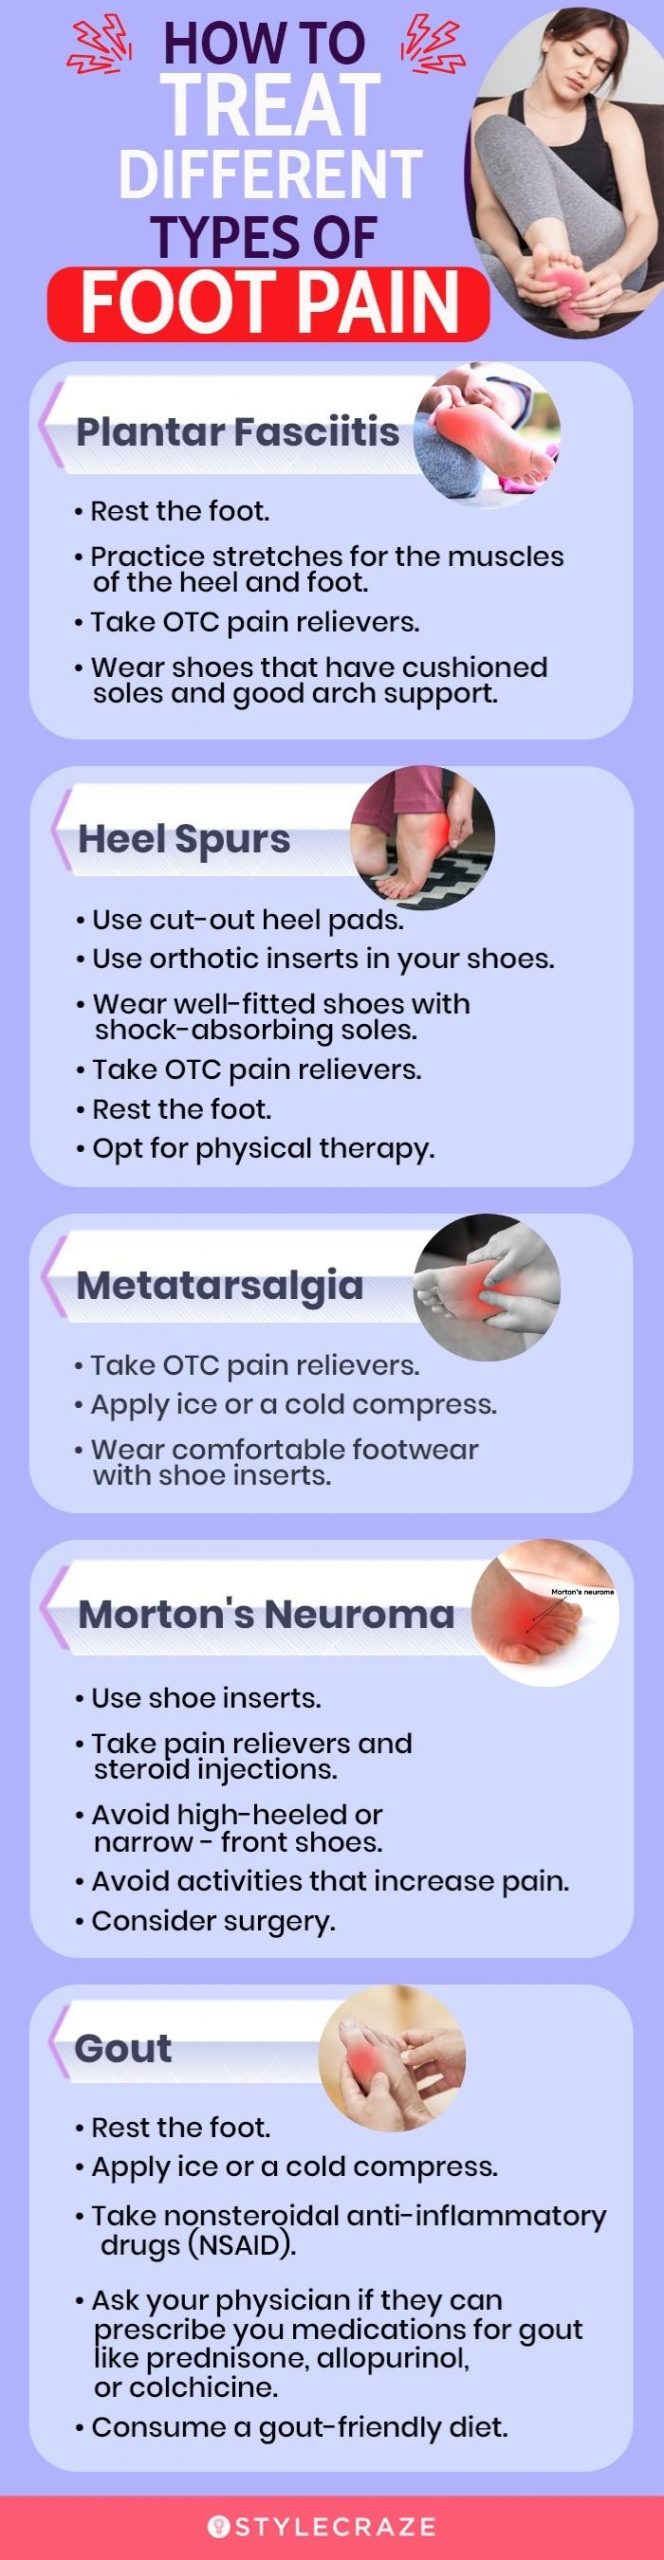 how to treat different types of foot pain [infographic]